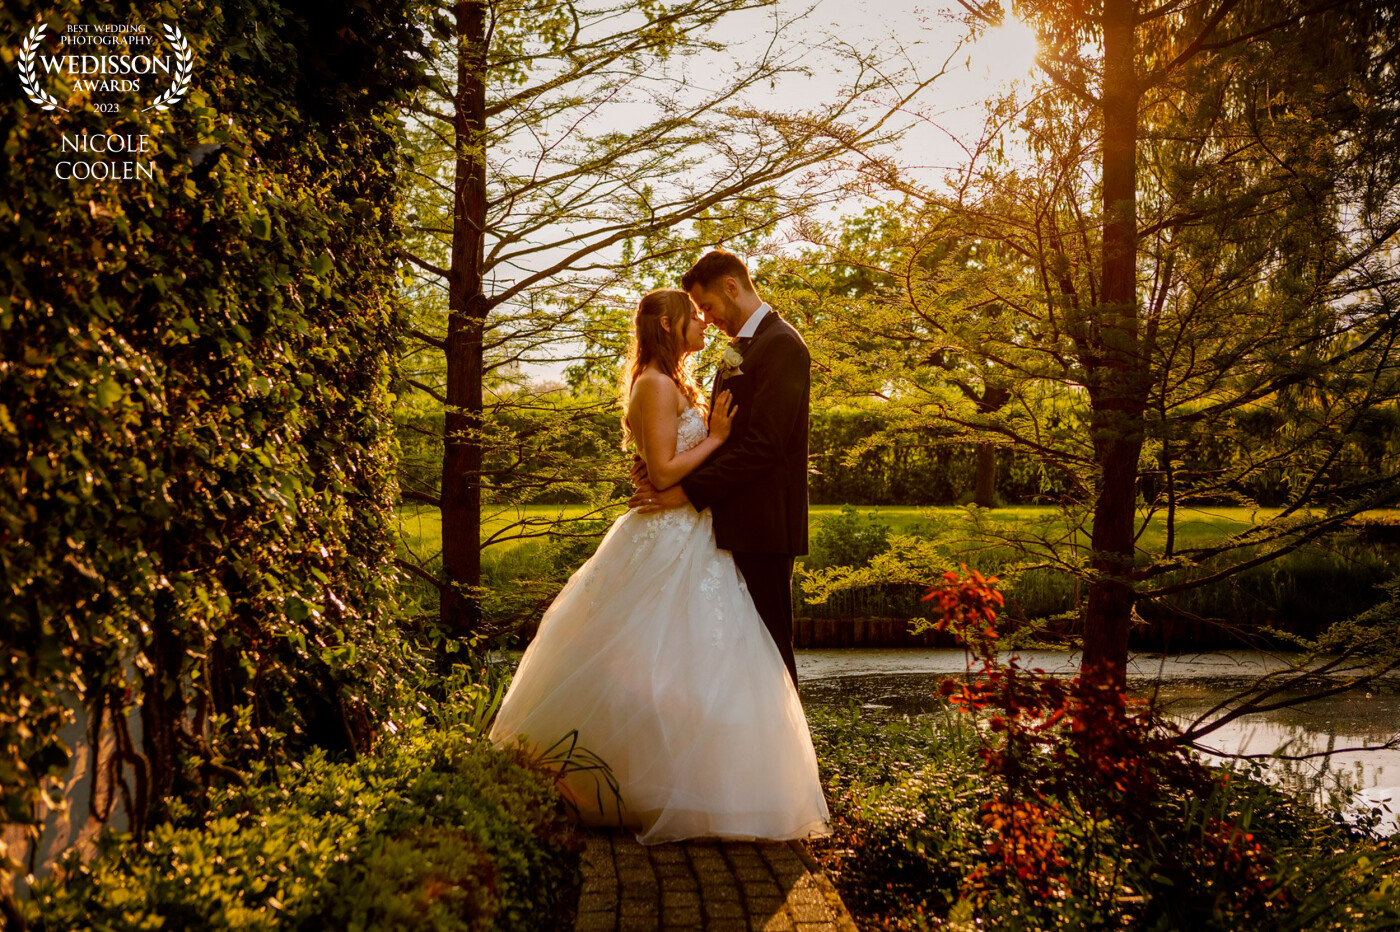 I love to take a few minutes during golden hour to take a wedding couple outside and make magical pictures.